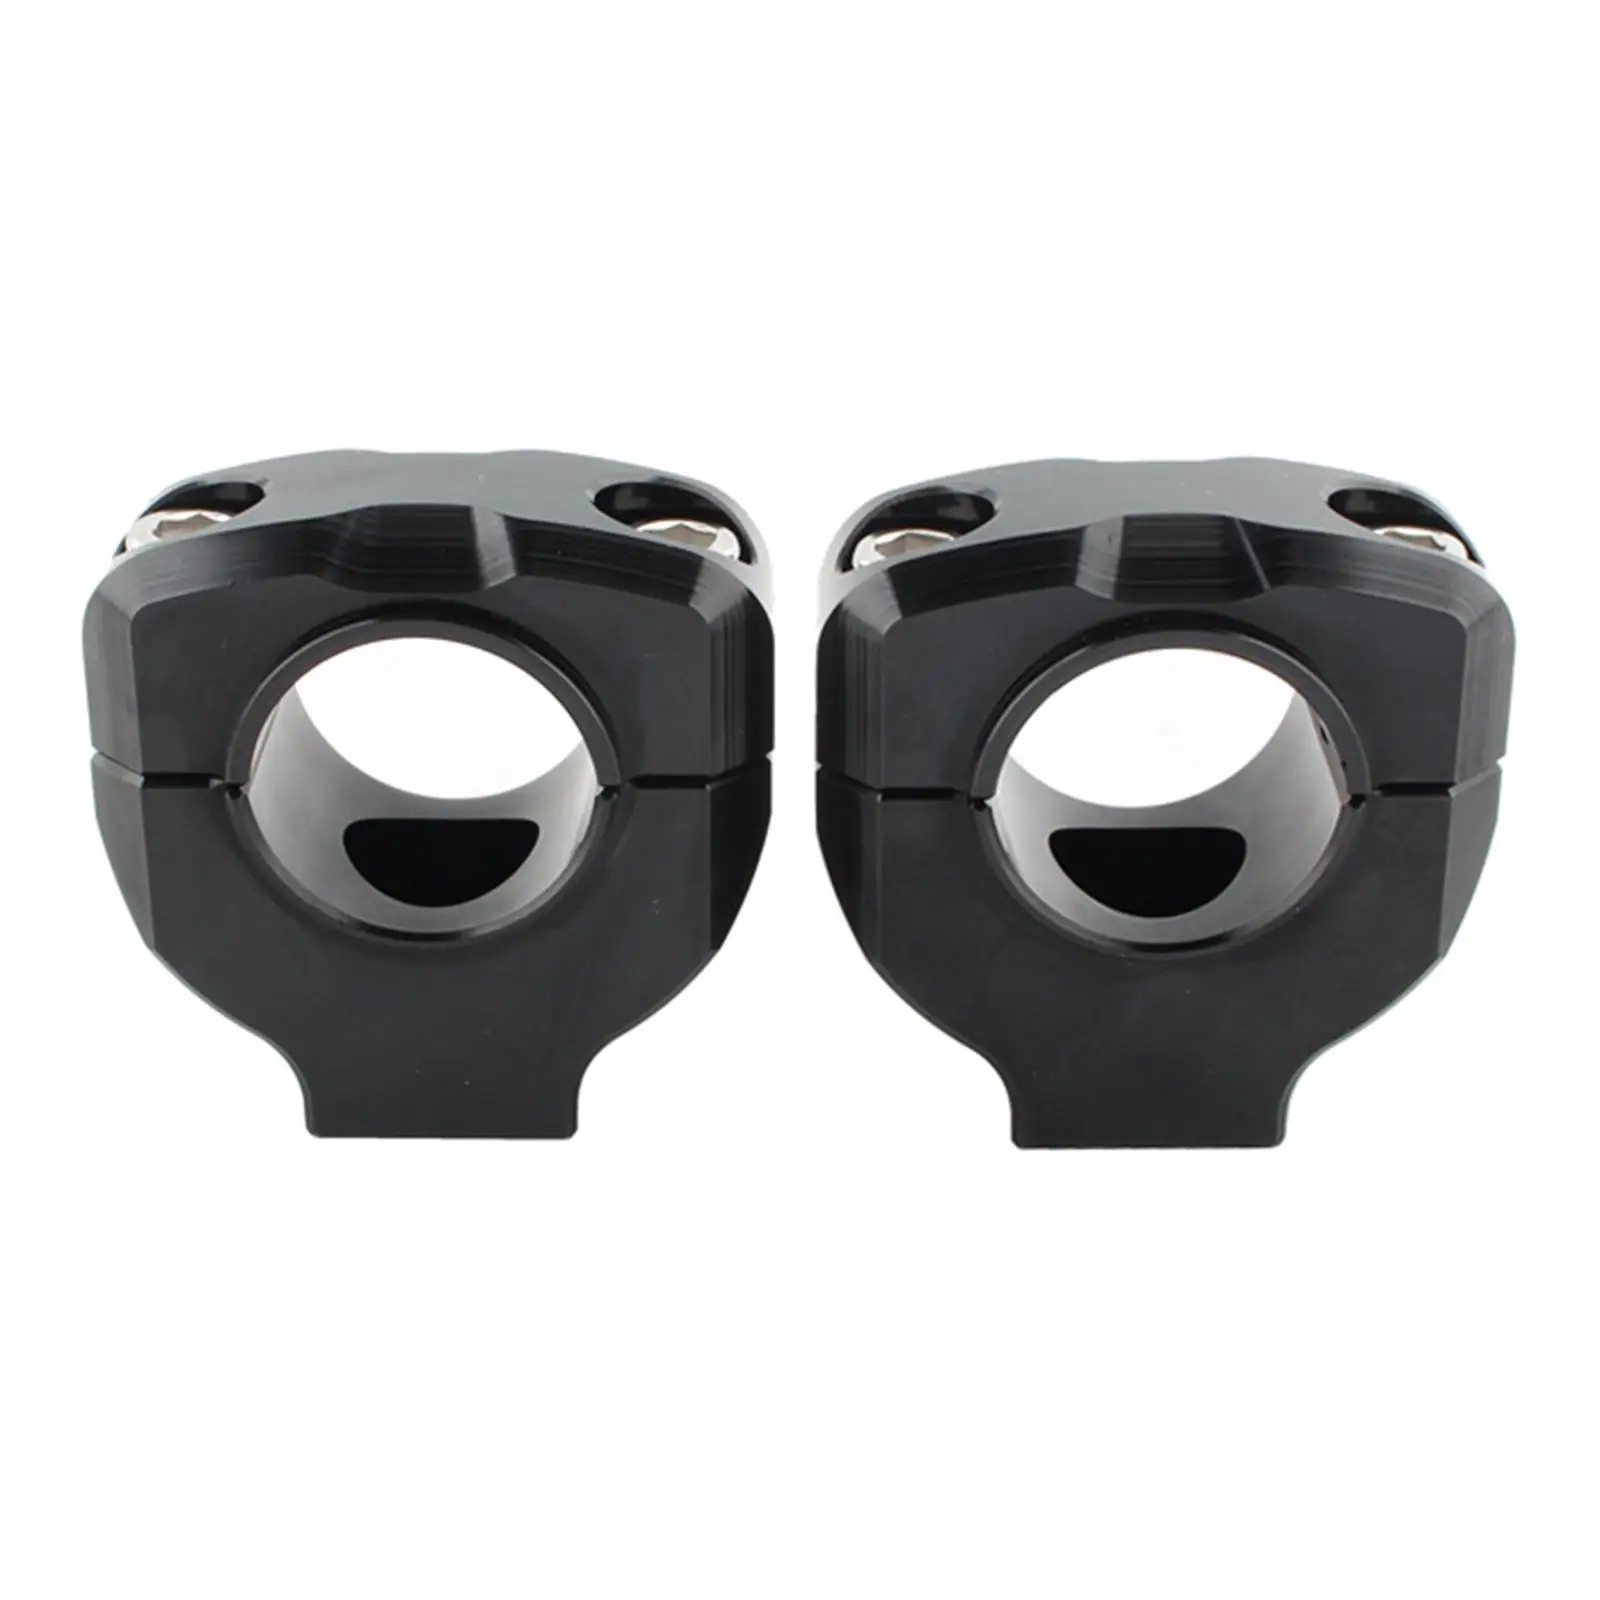 1 pair of universal motorcycle 28mm 1/8 inch handlebar riser clamp   Lifter - £16.89 GBP